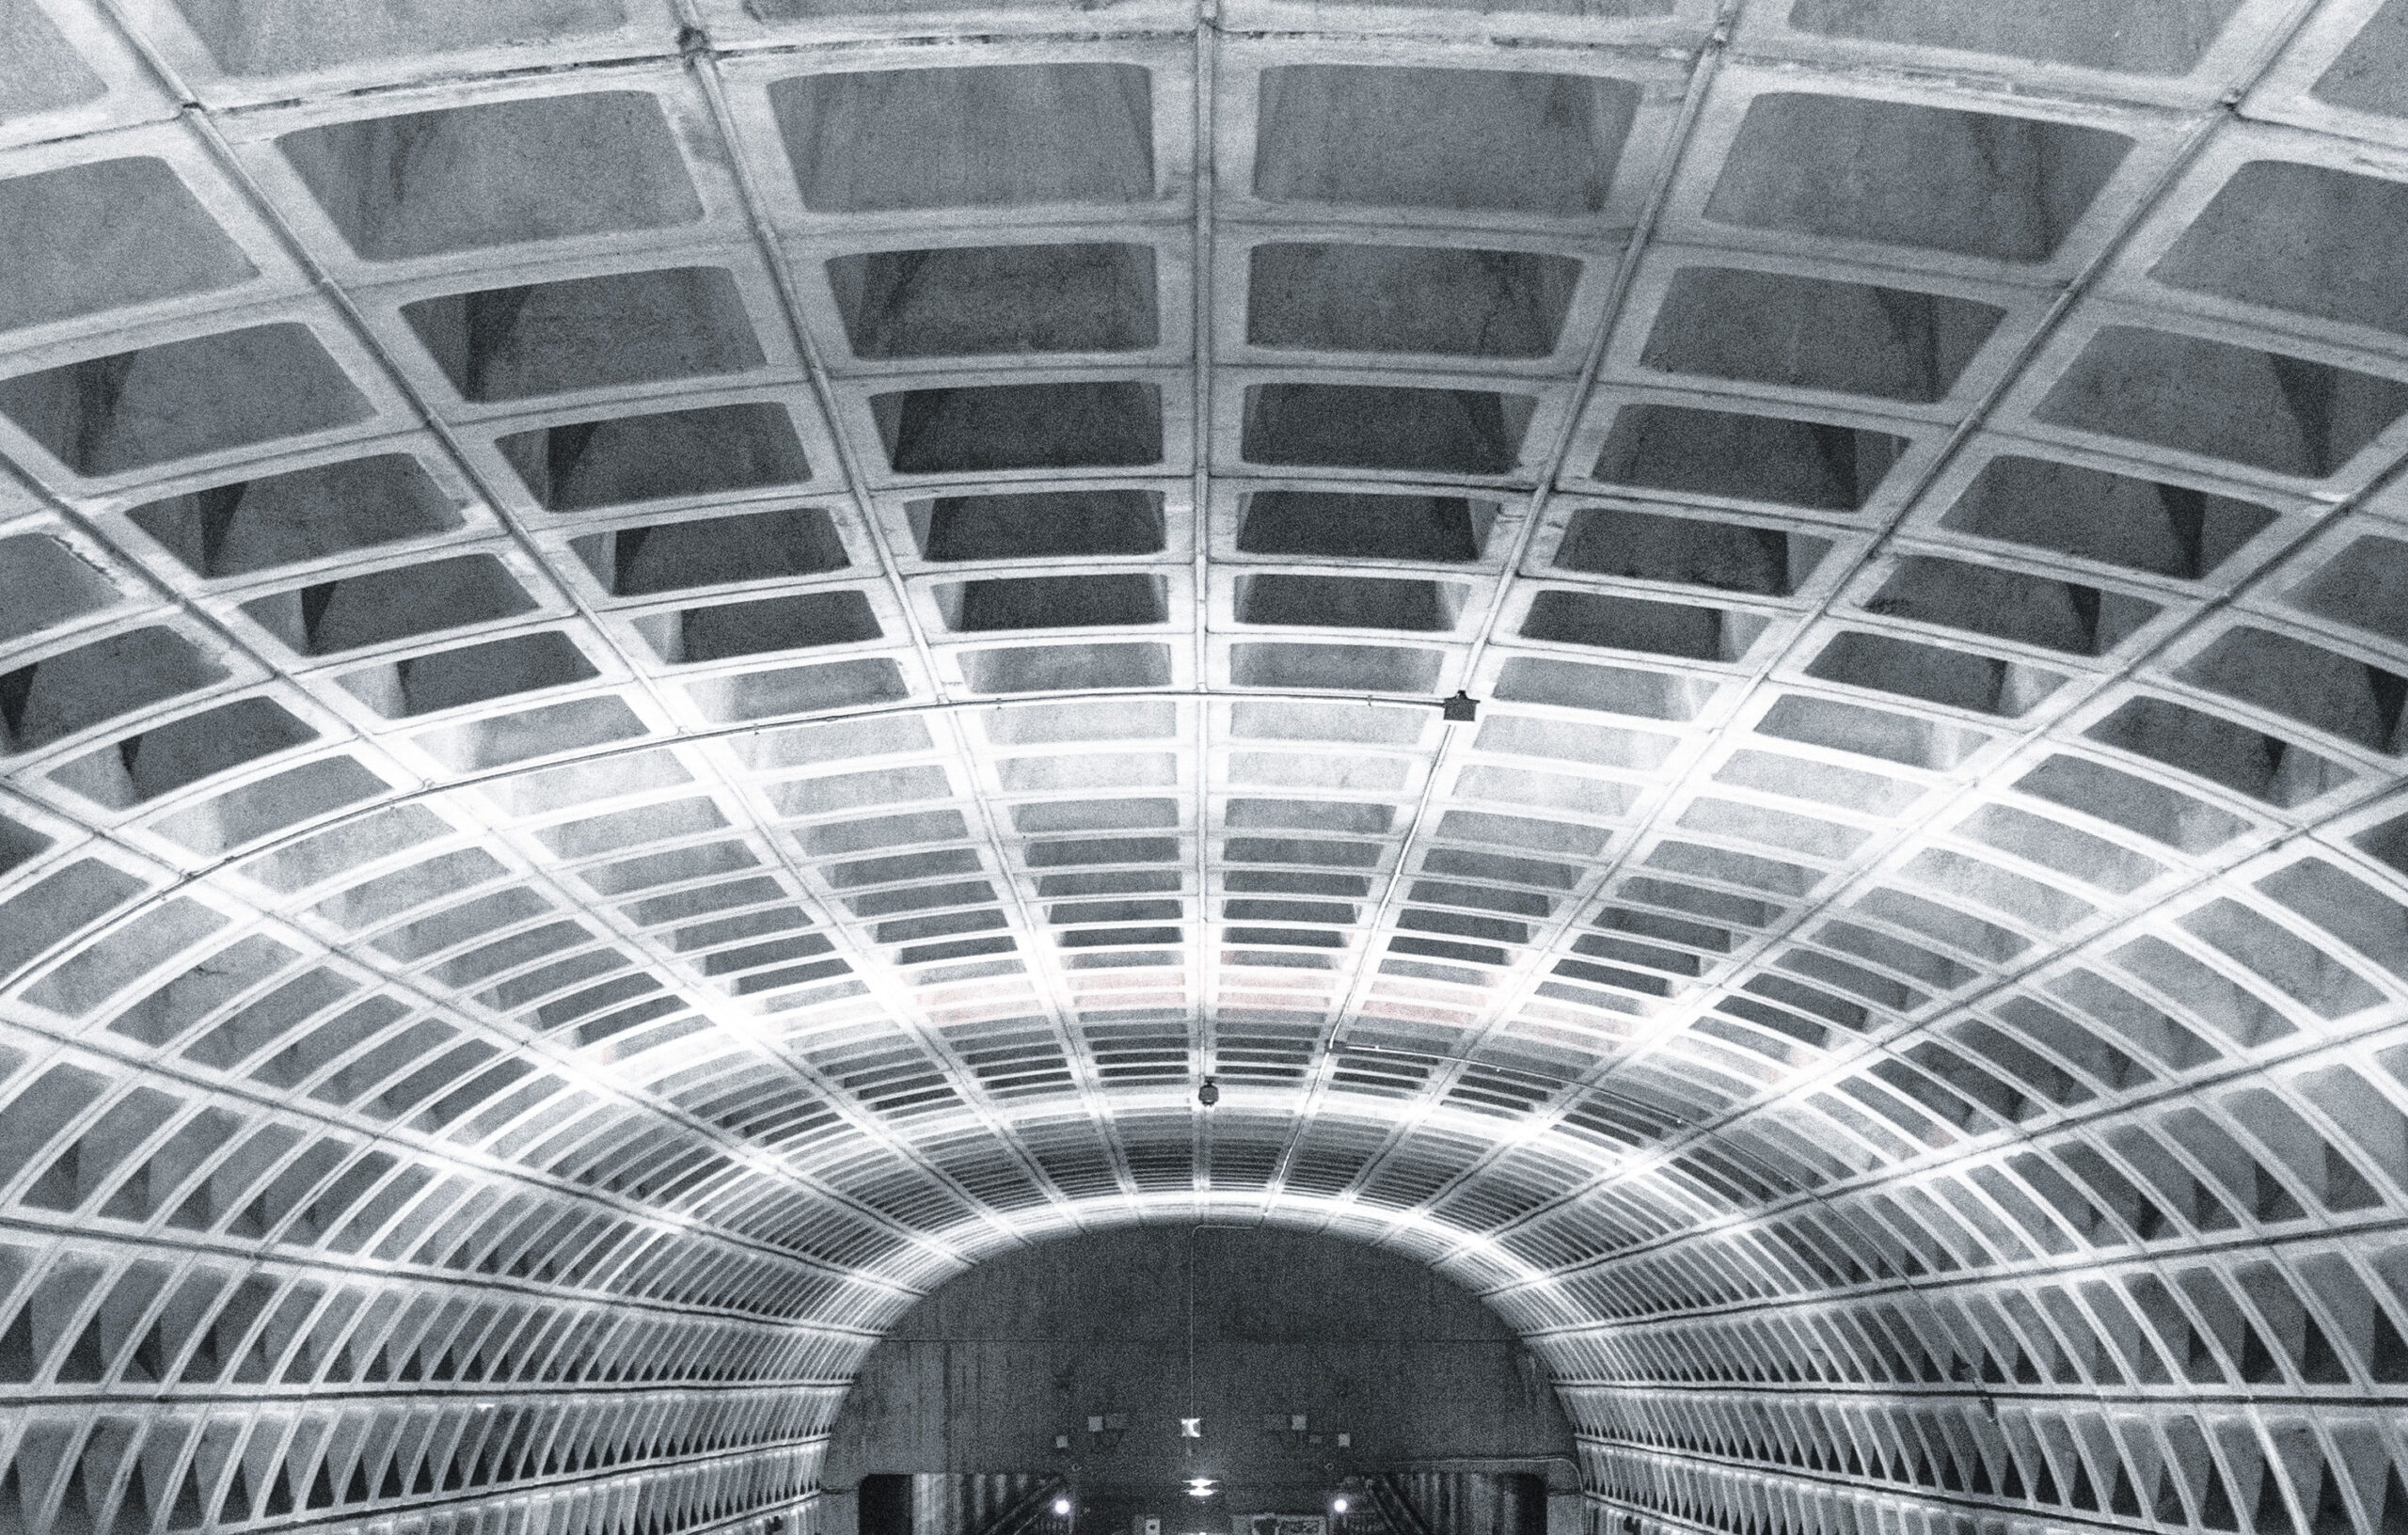 An image of a Washington DC metro station in black and white